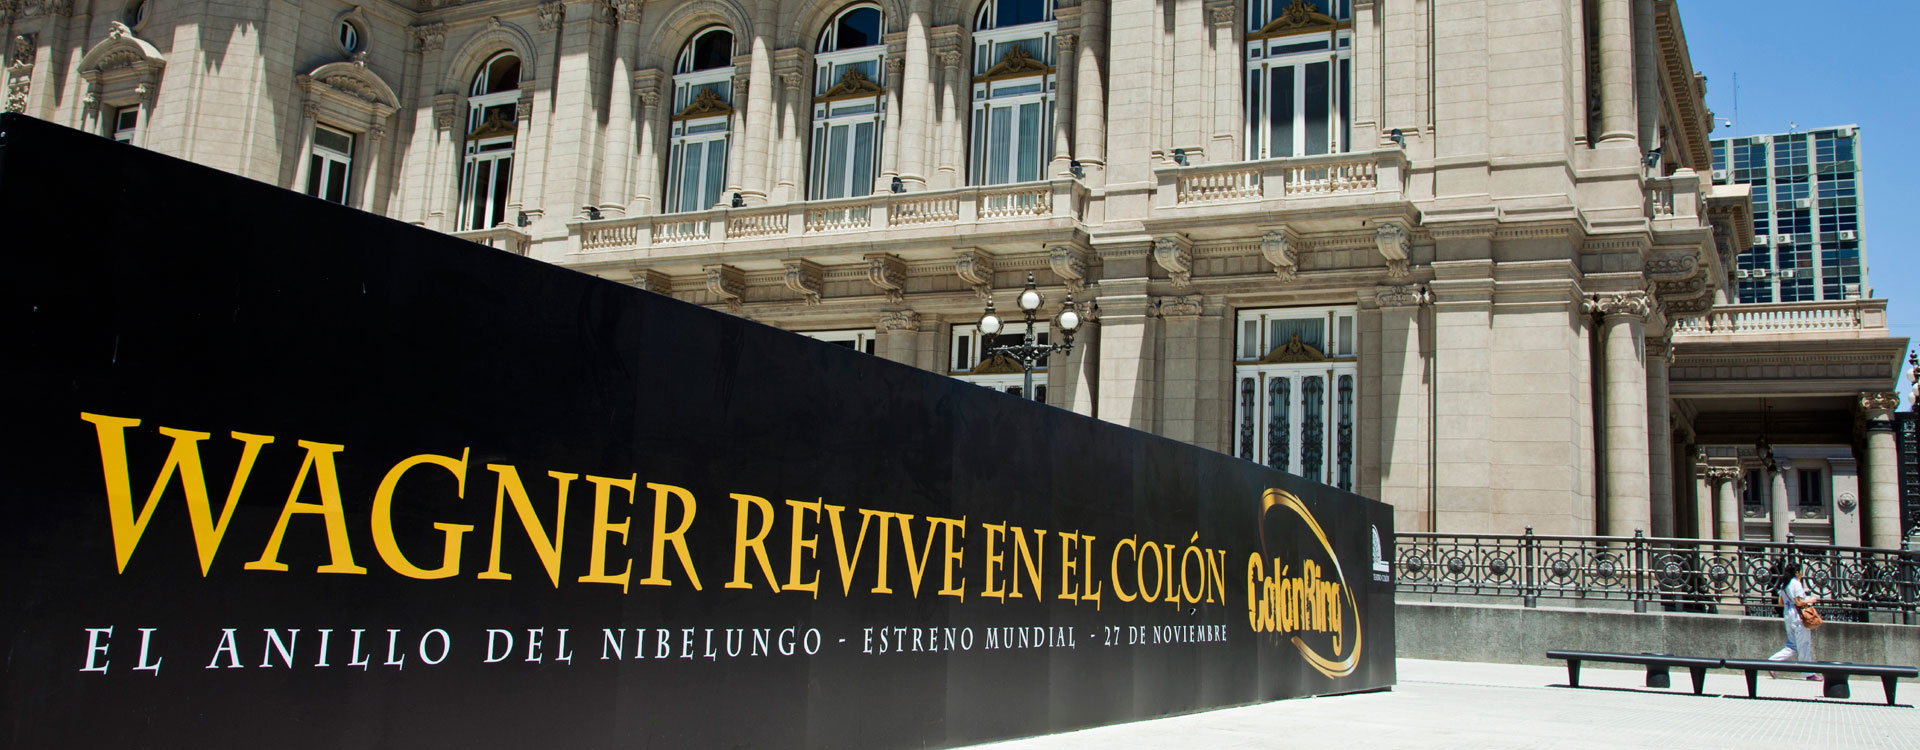 The Colón Ring - Wagner in Buenos Aires